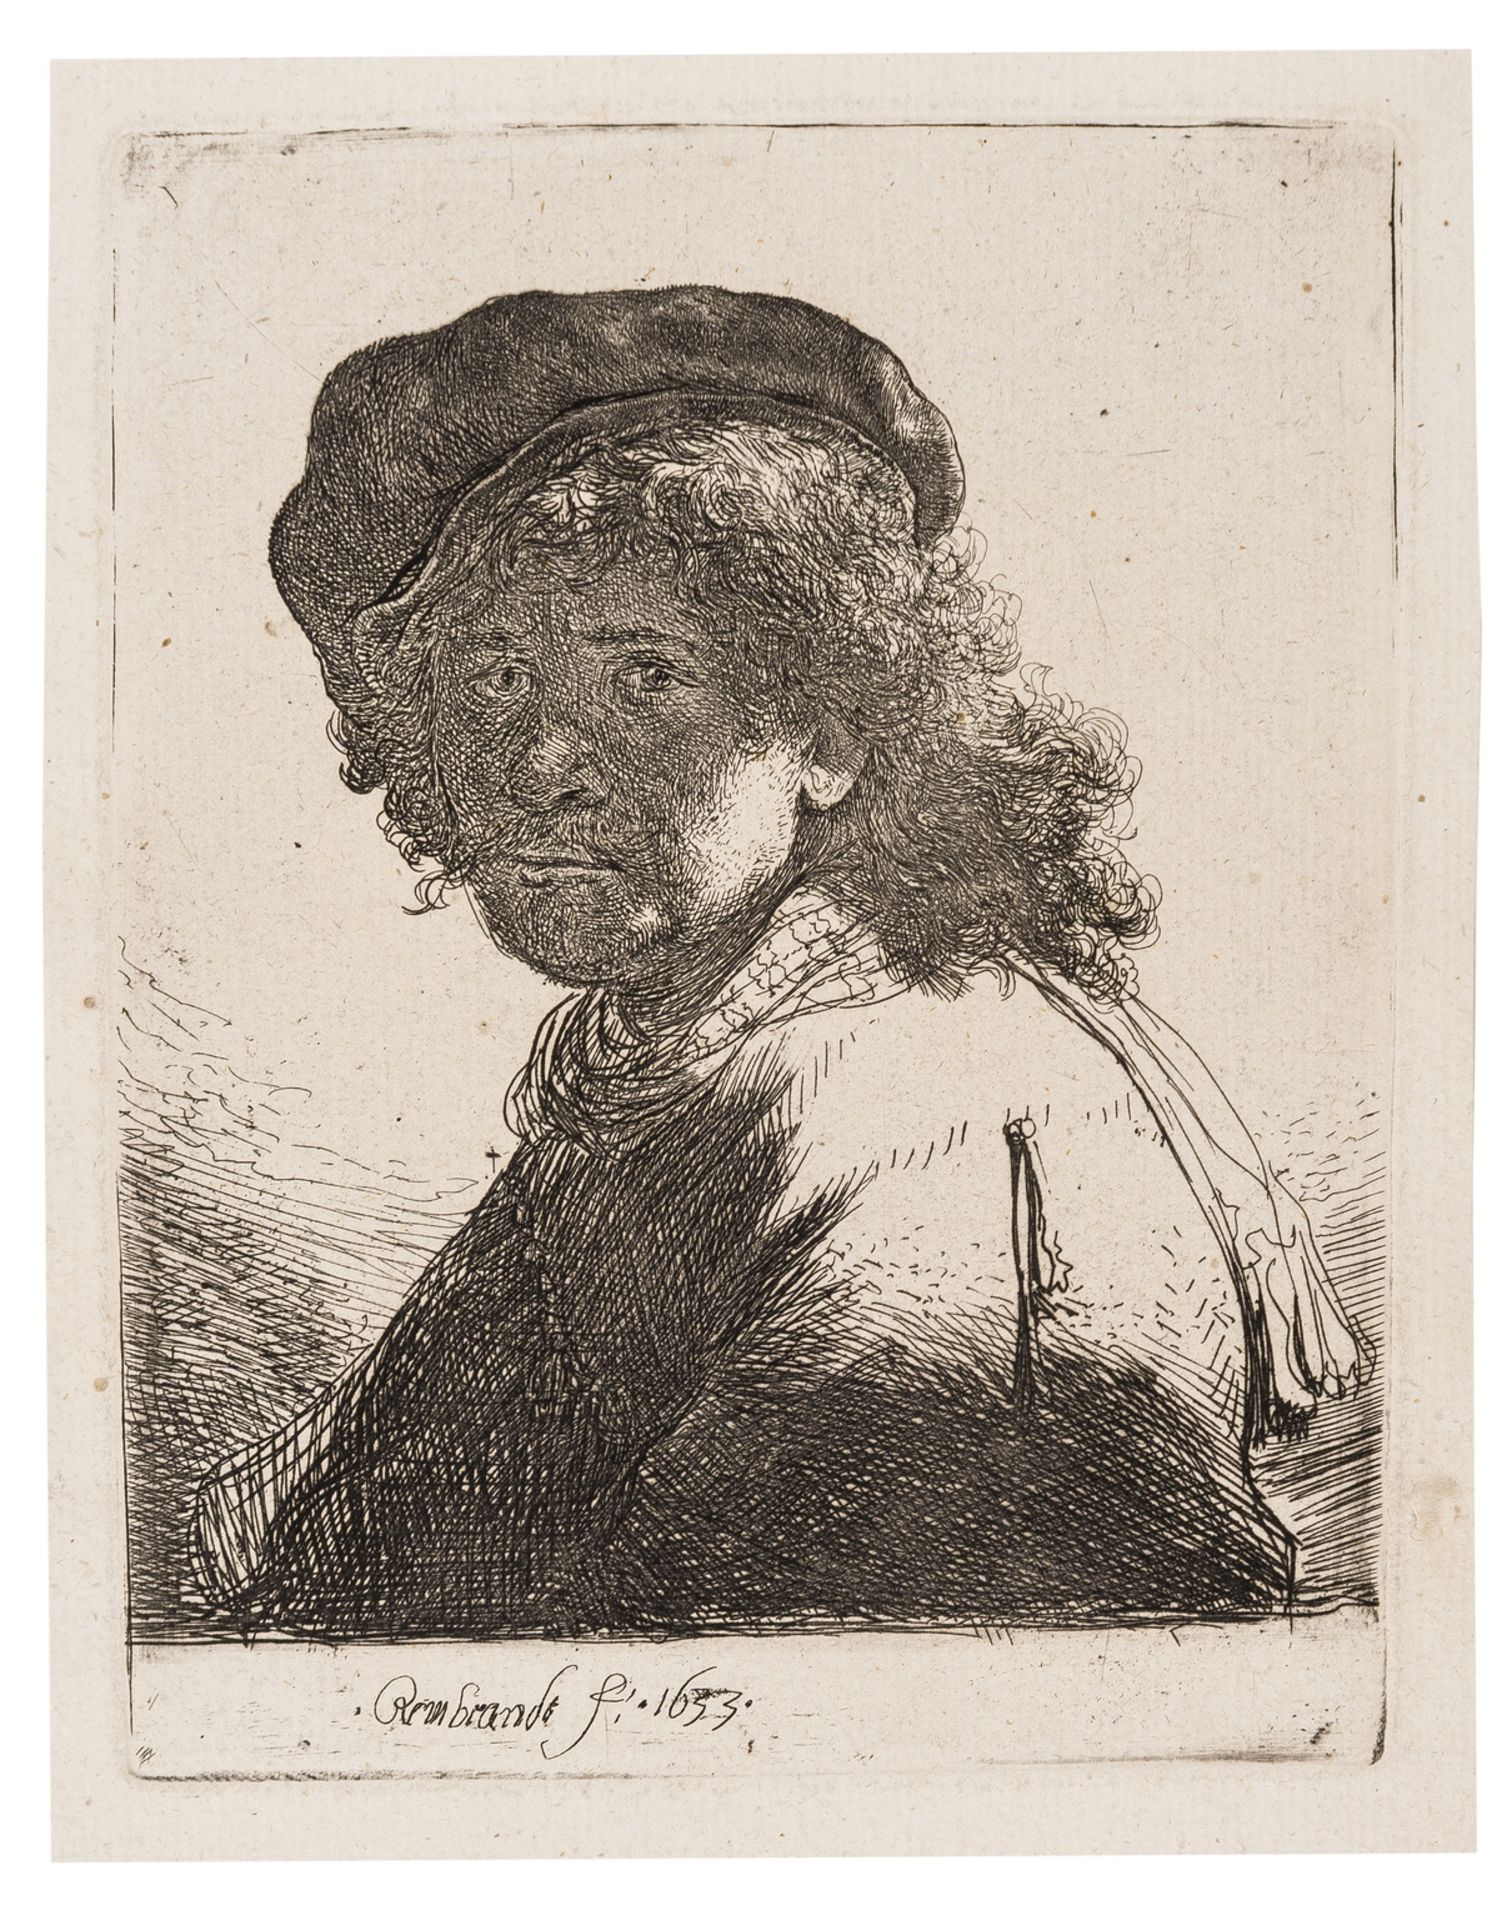 Rembrandt van Rijn (1606-1669) Self-Portrait in a Cap and Scarf with the Face Dark